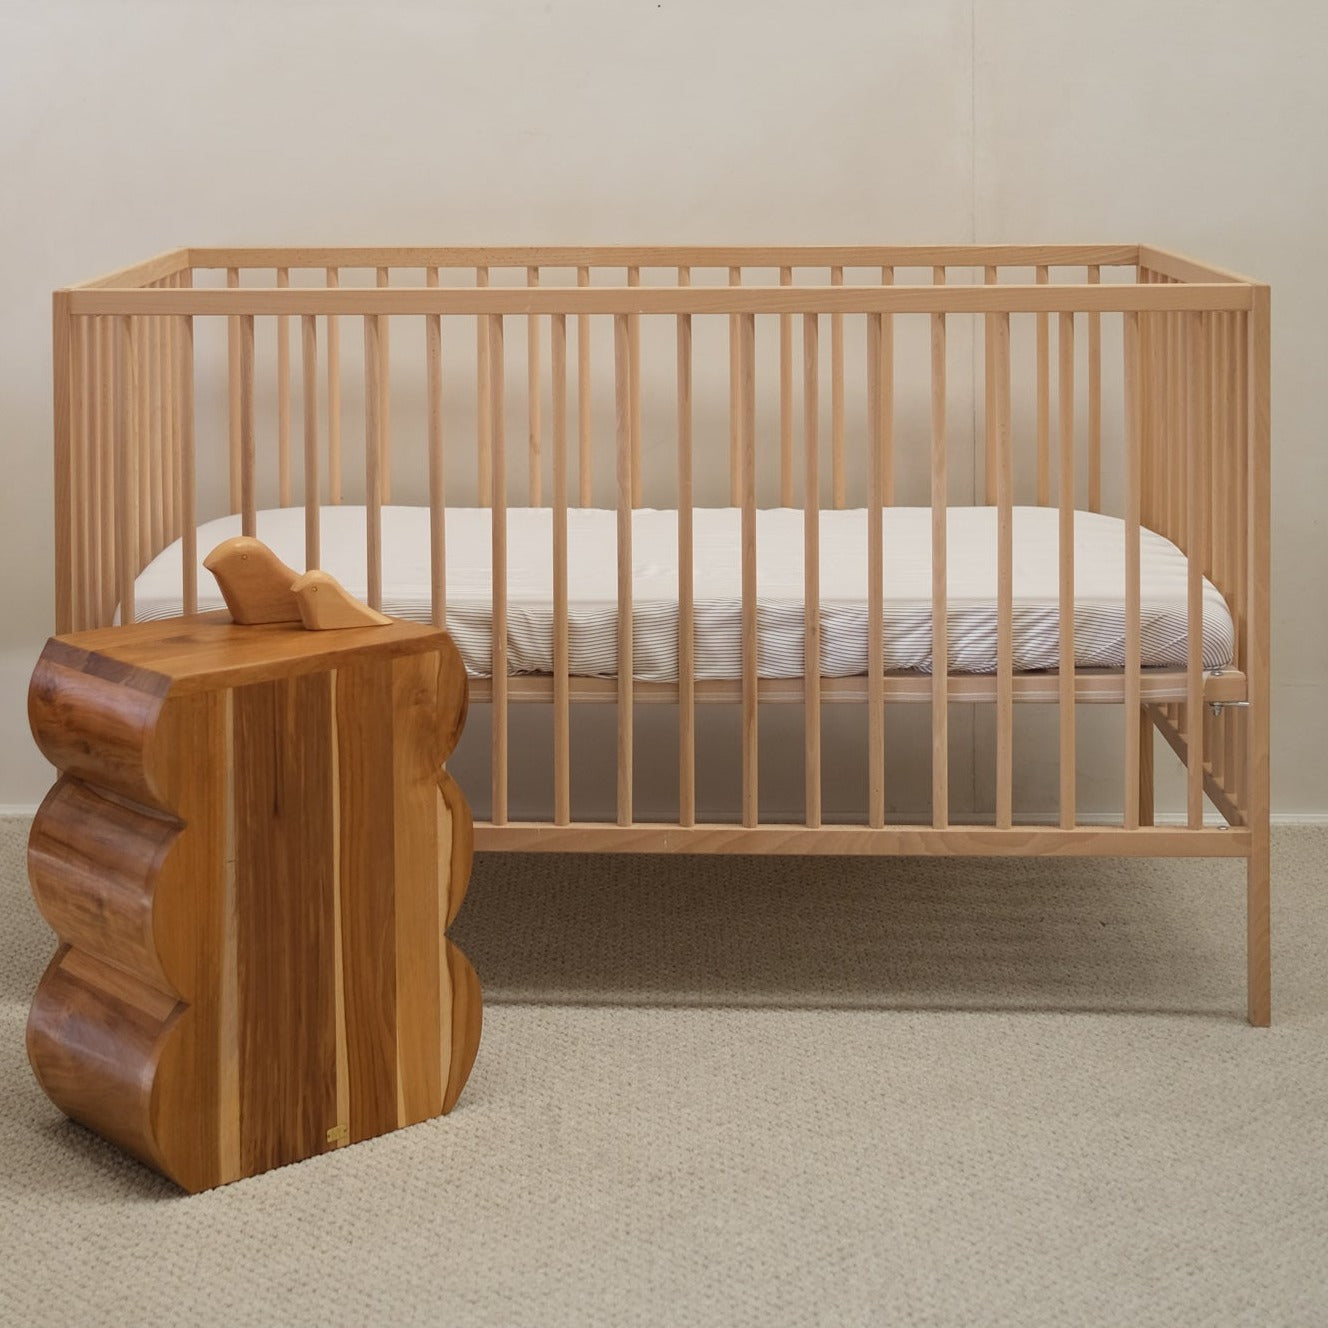 Bamboo Cot Fitted Sheet - Mocha Stripe